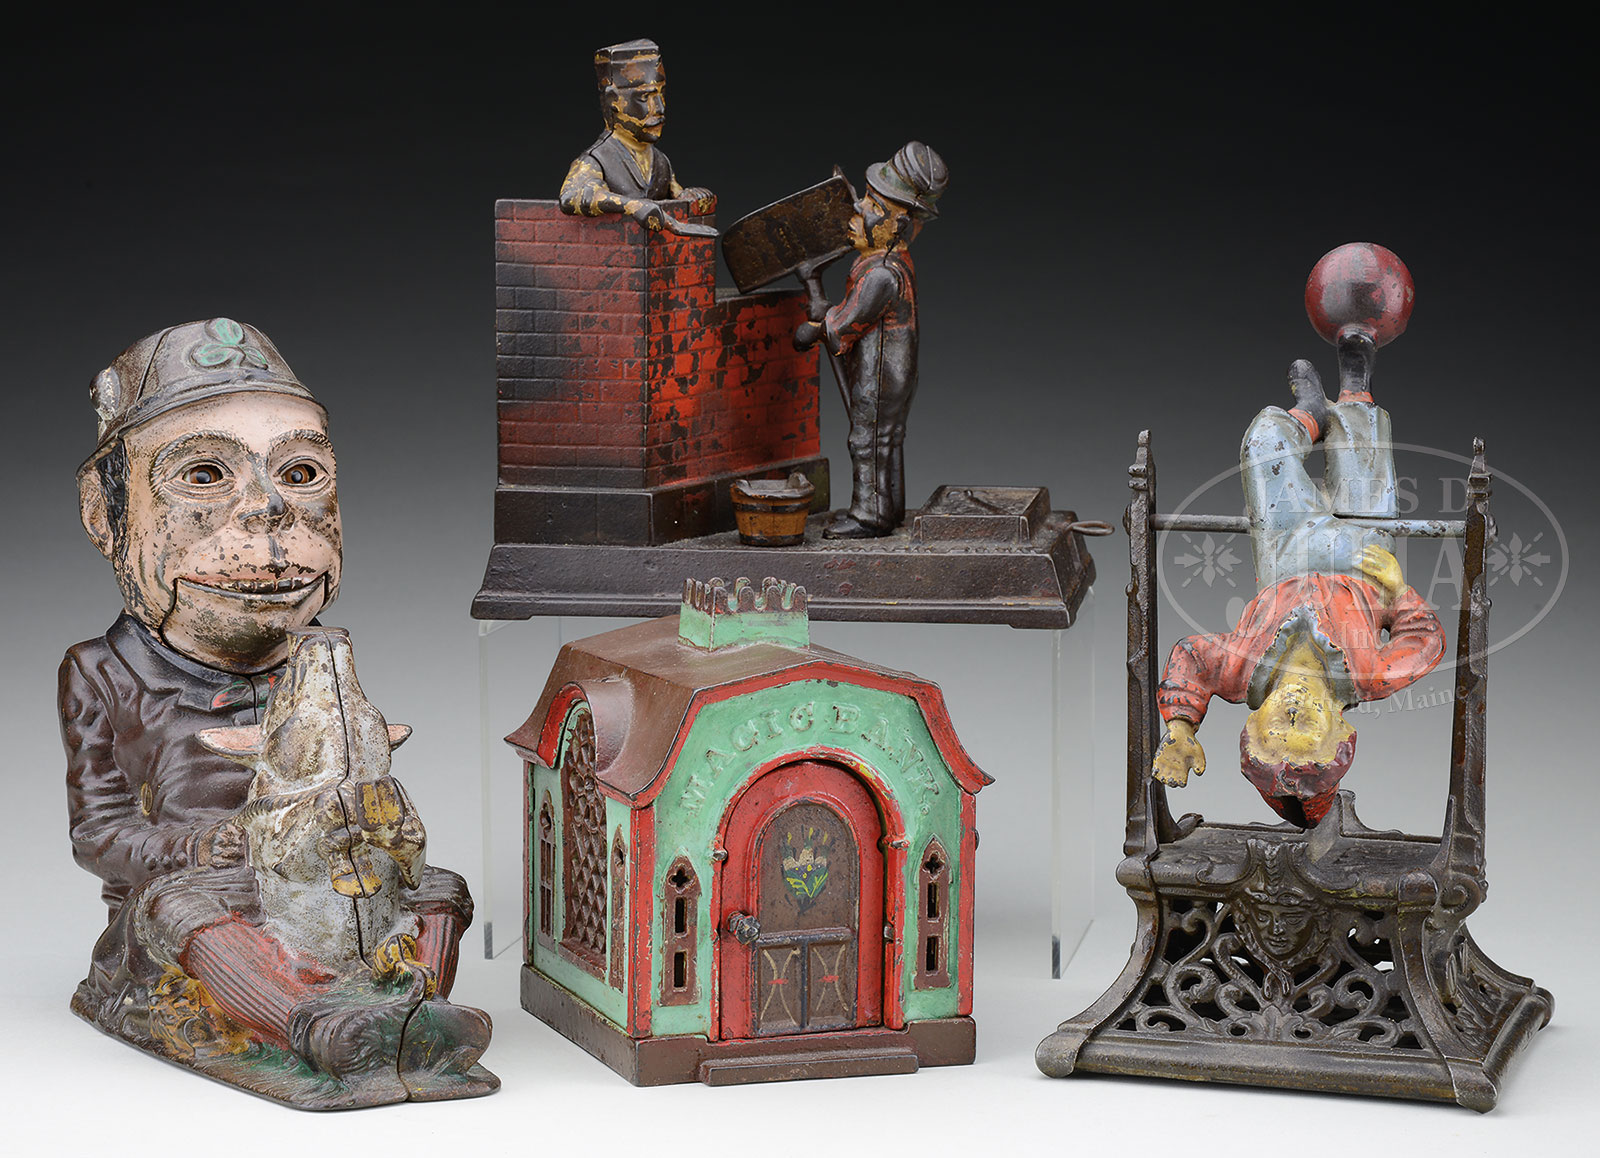 FOUR CAST-IRON MECHANICAL BANKS INCLUDING MASON BANK, BOY ON TRAPEZE, MAGIC BANK, PADDY & THE PIG.